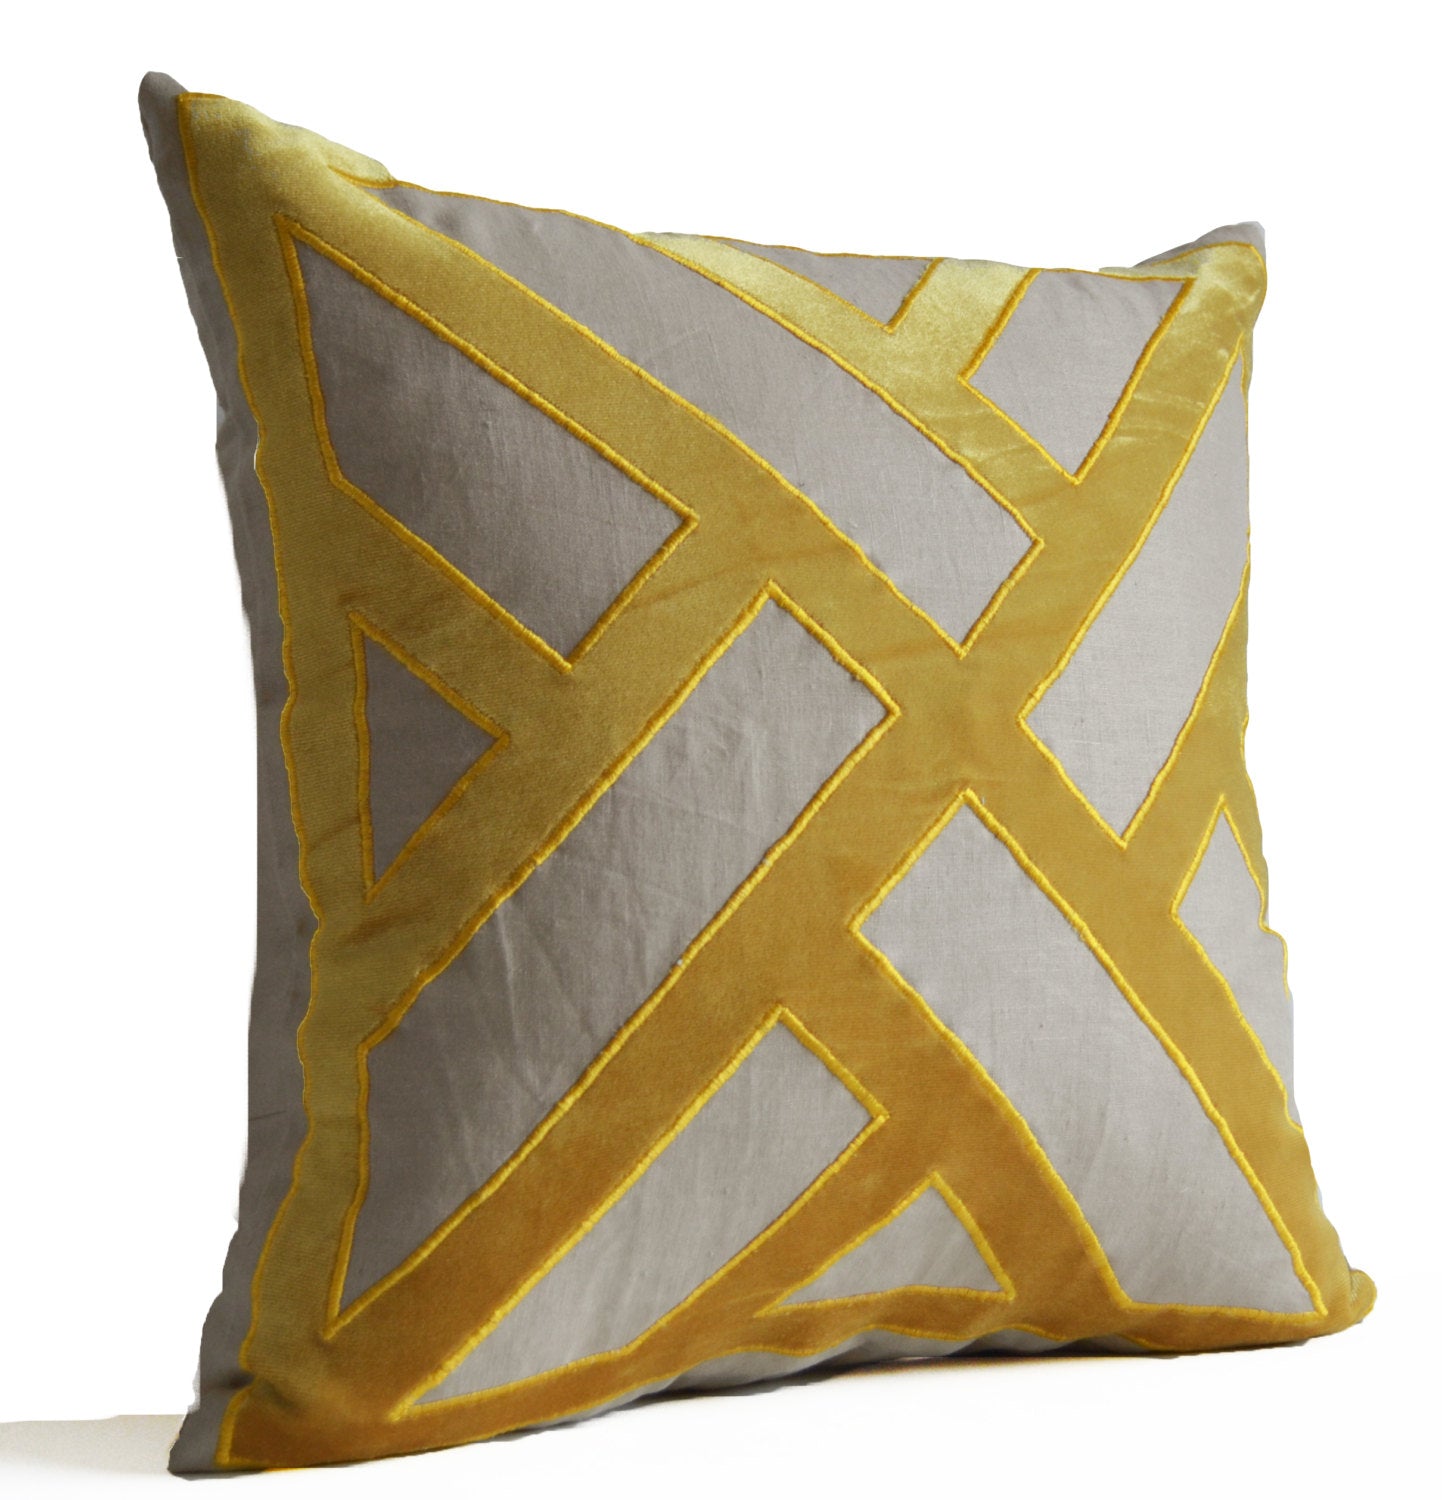 Amore Beaute Grey linen pillow cover with yellow velvet pillow to create a textured geometric pattern, dorm pillow cover